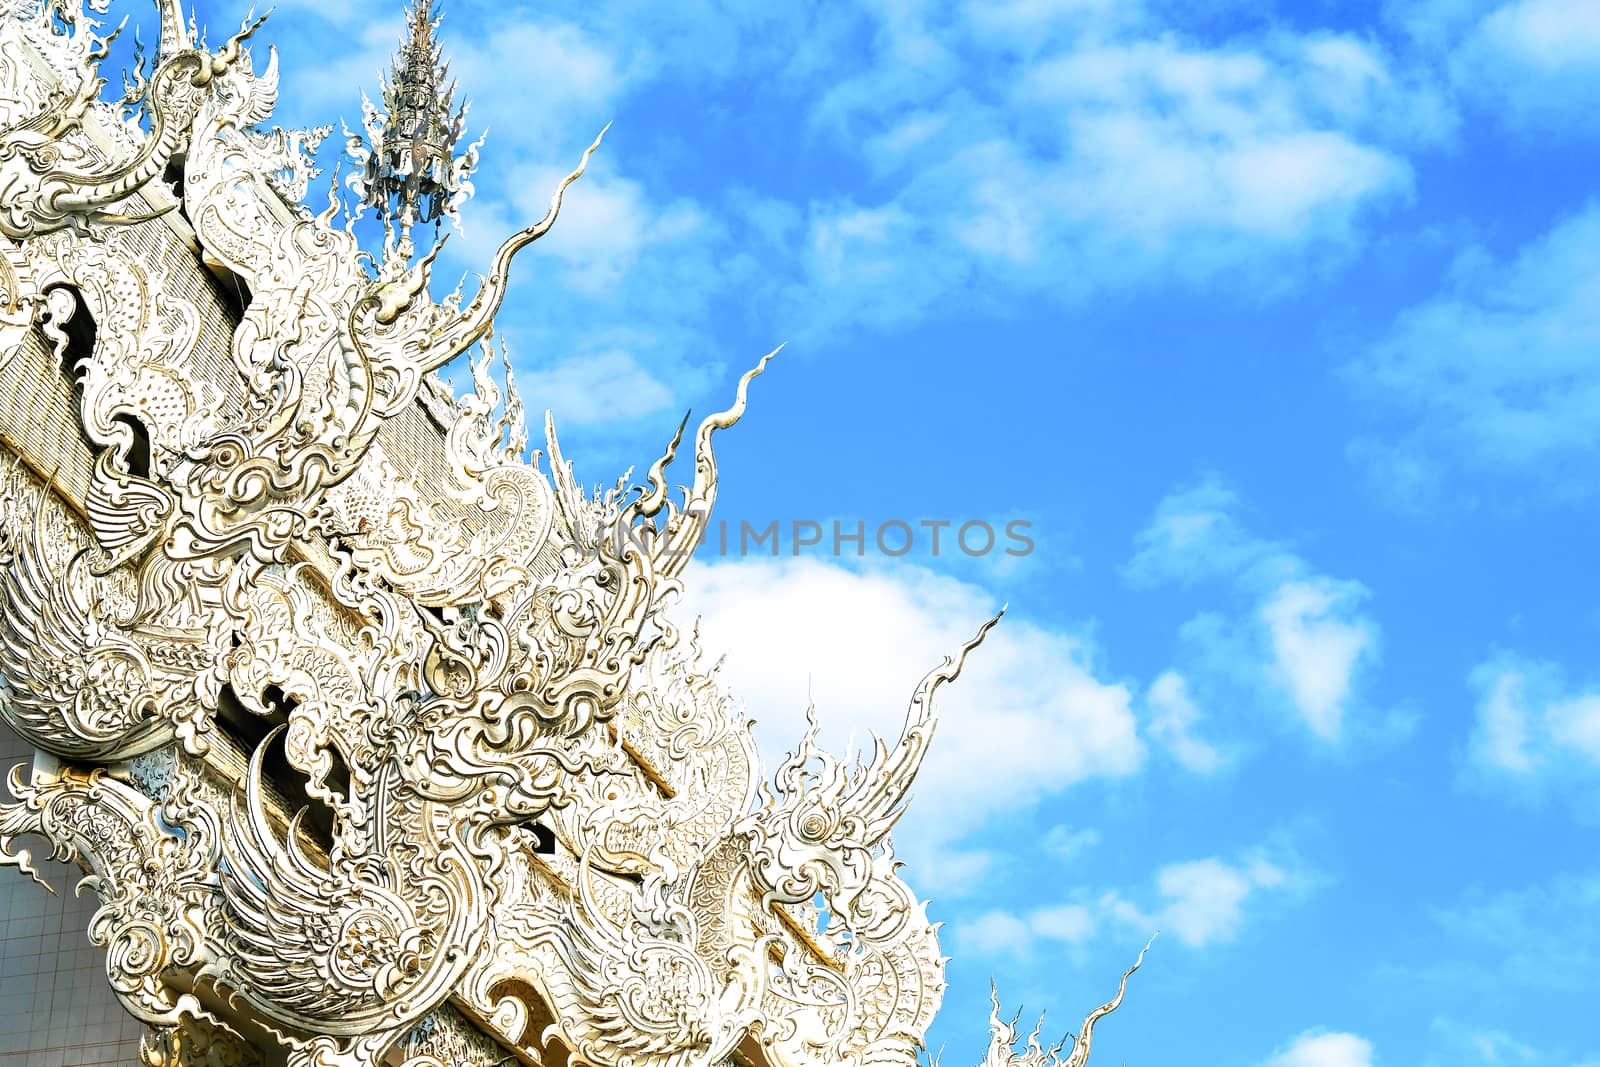 details of Northern Thai Buddist temple roof with imaginative mystical creatures, elaborate stucco style